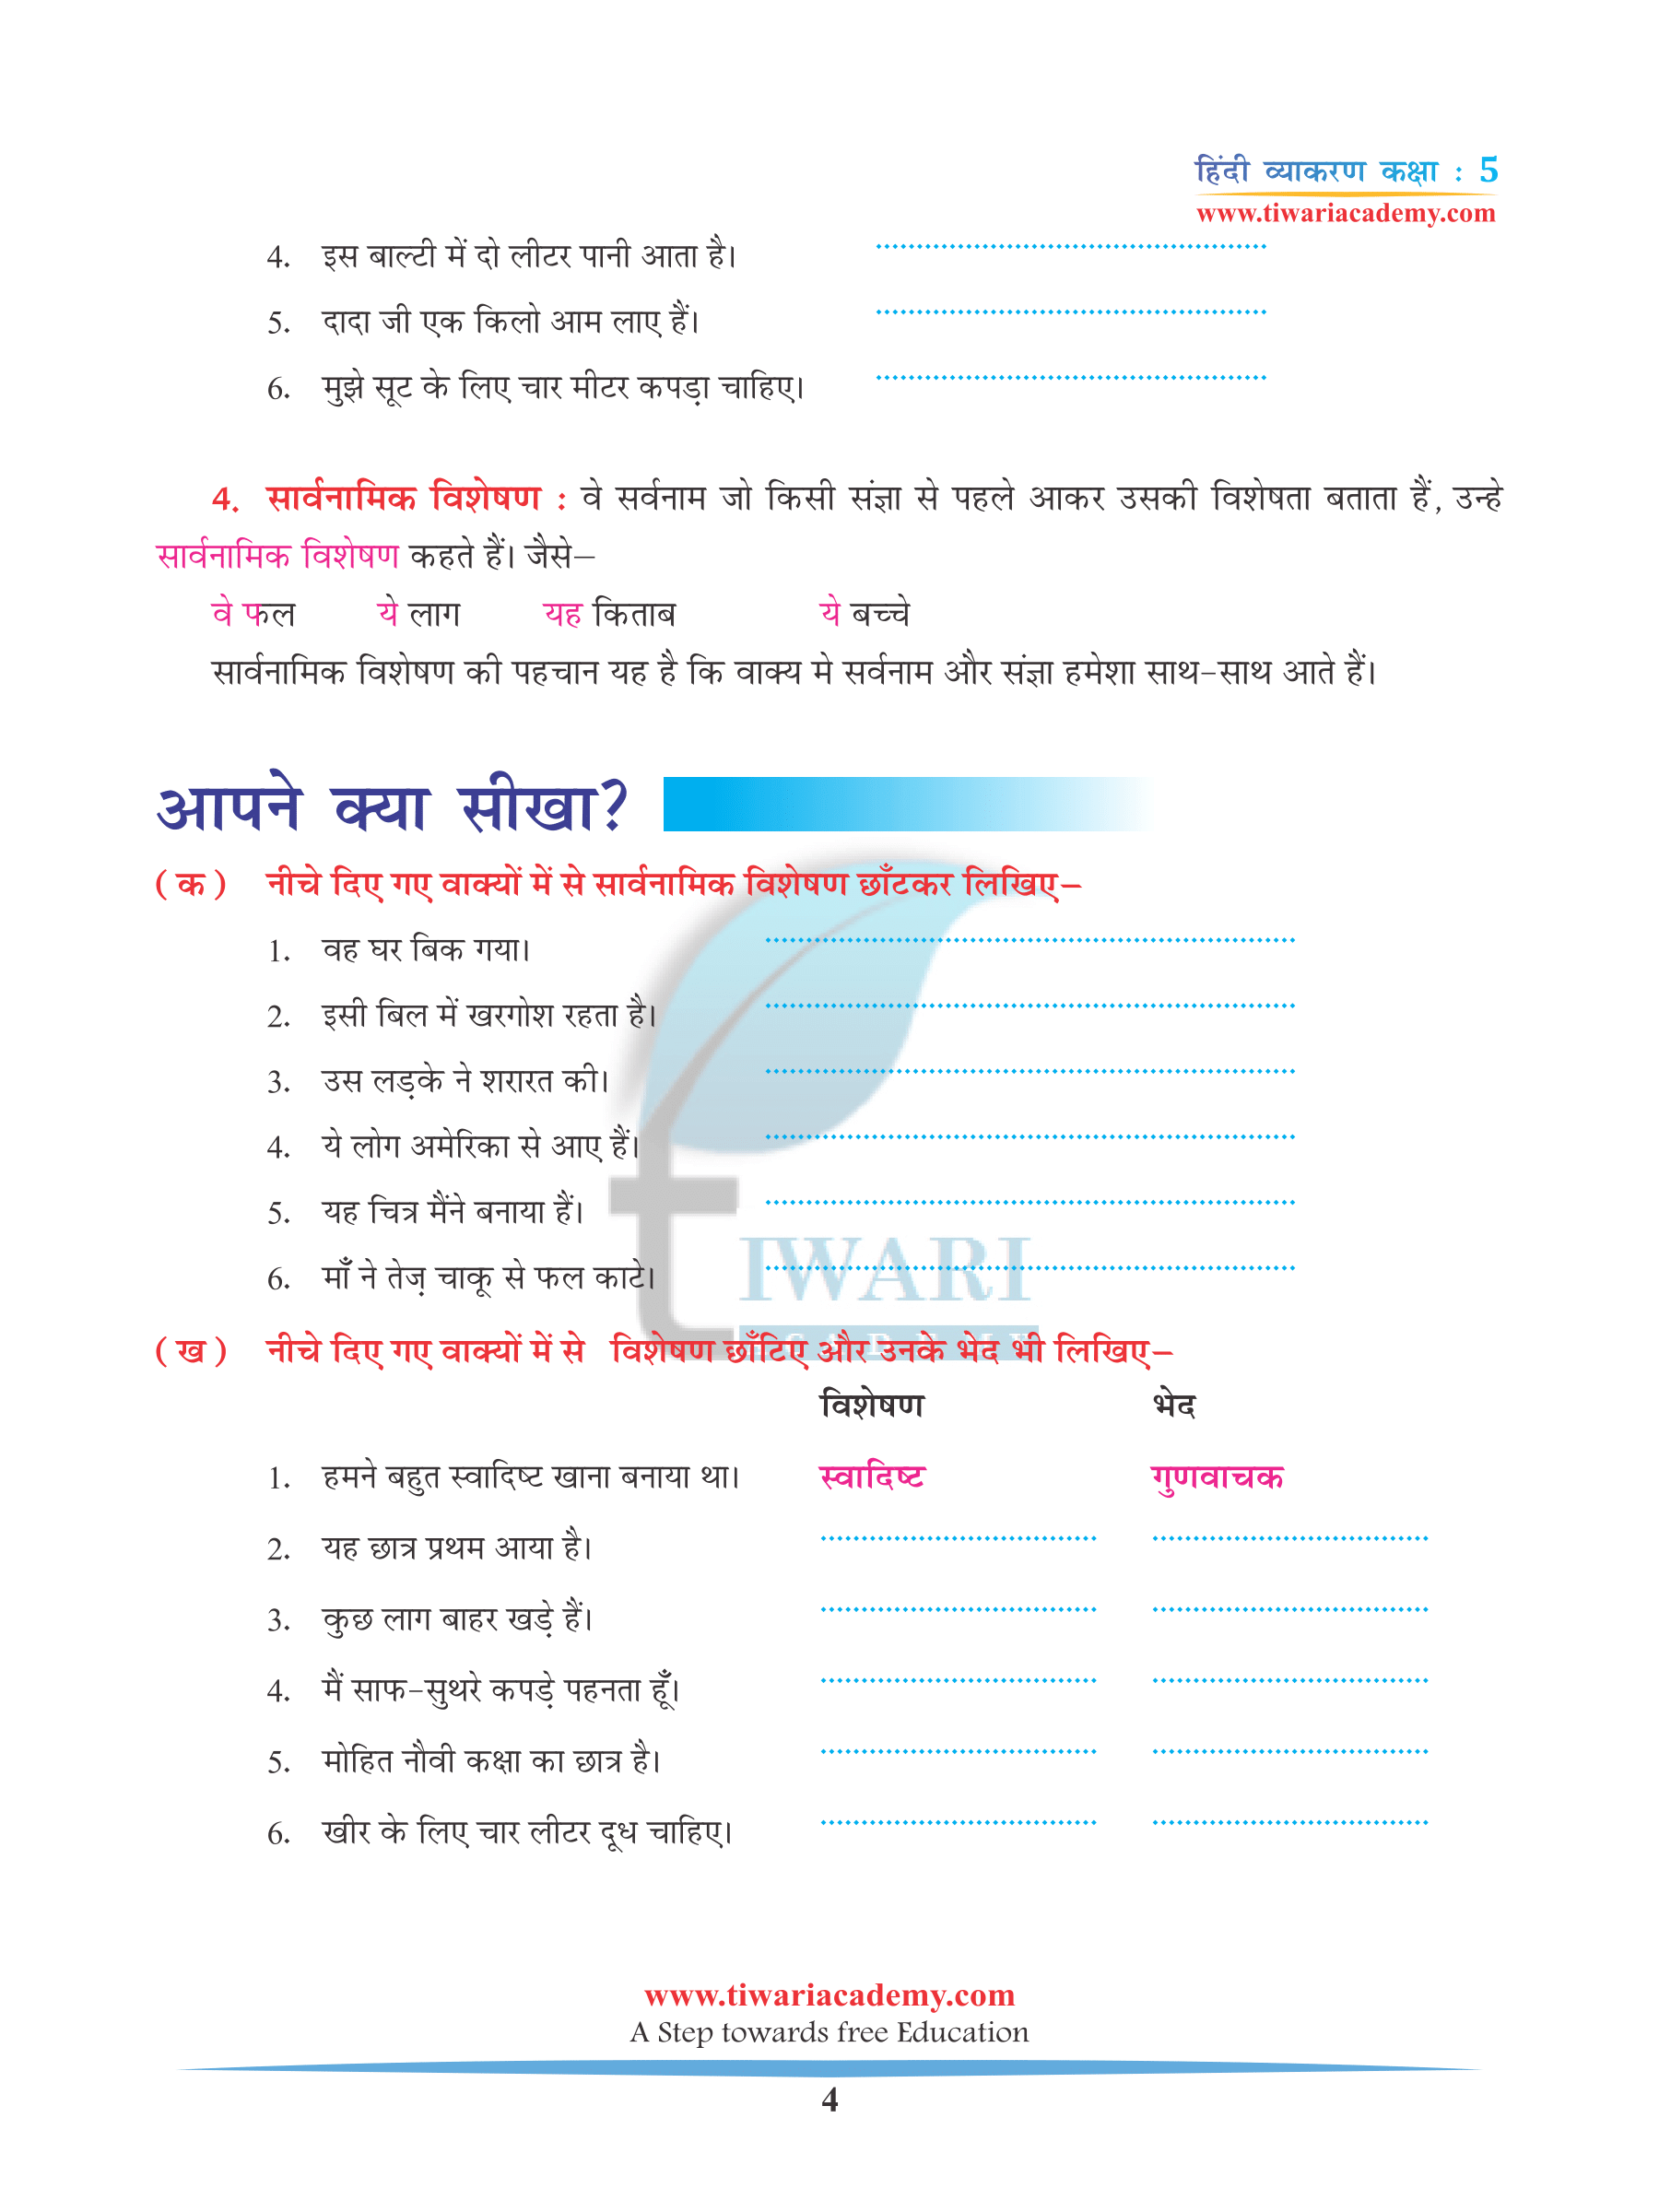 Class 5 Hindi Grammar Chapter 6 Solutions in PDF